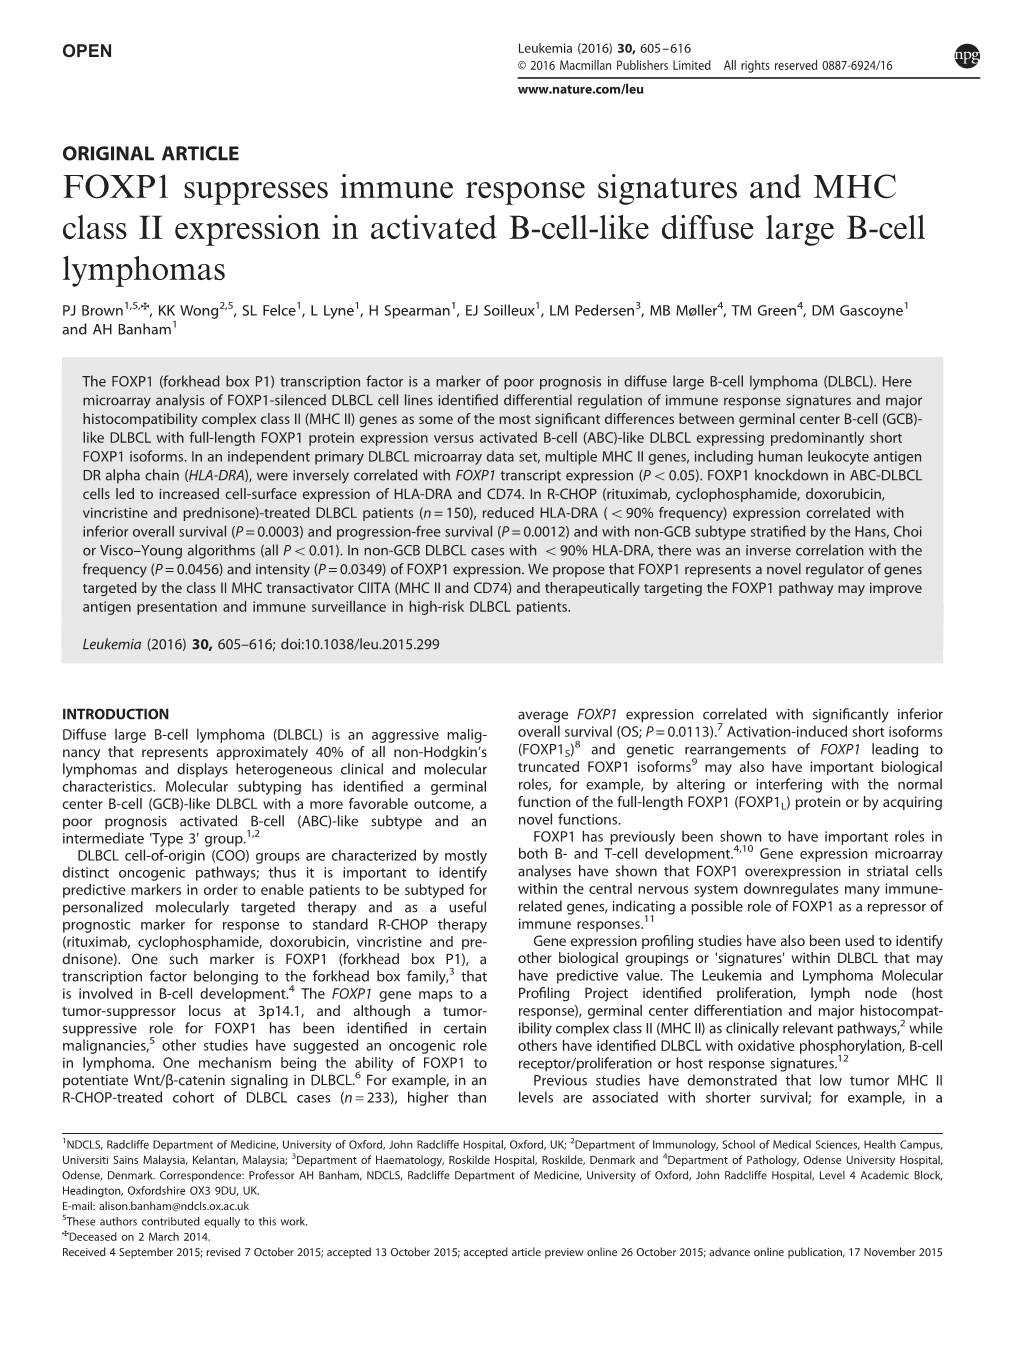 FOXP1 Suppresses Immune Response Signatures and MHC Class II Expression in Activated B-Cell-Like Diffuse Large B-Cell Lymphomas